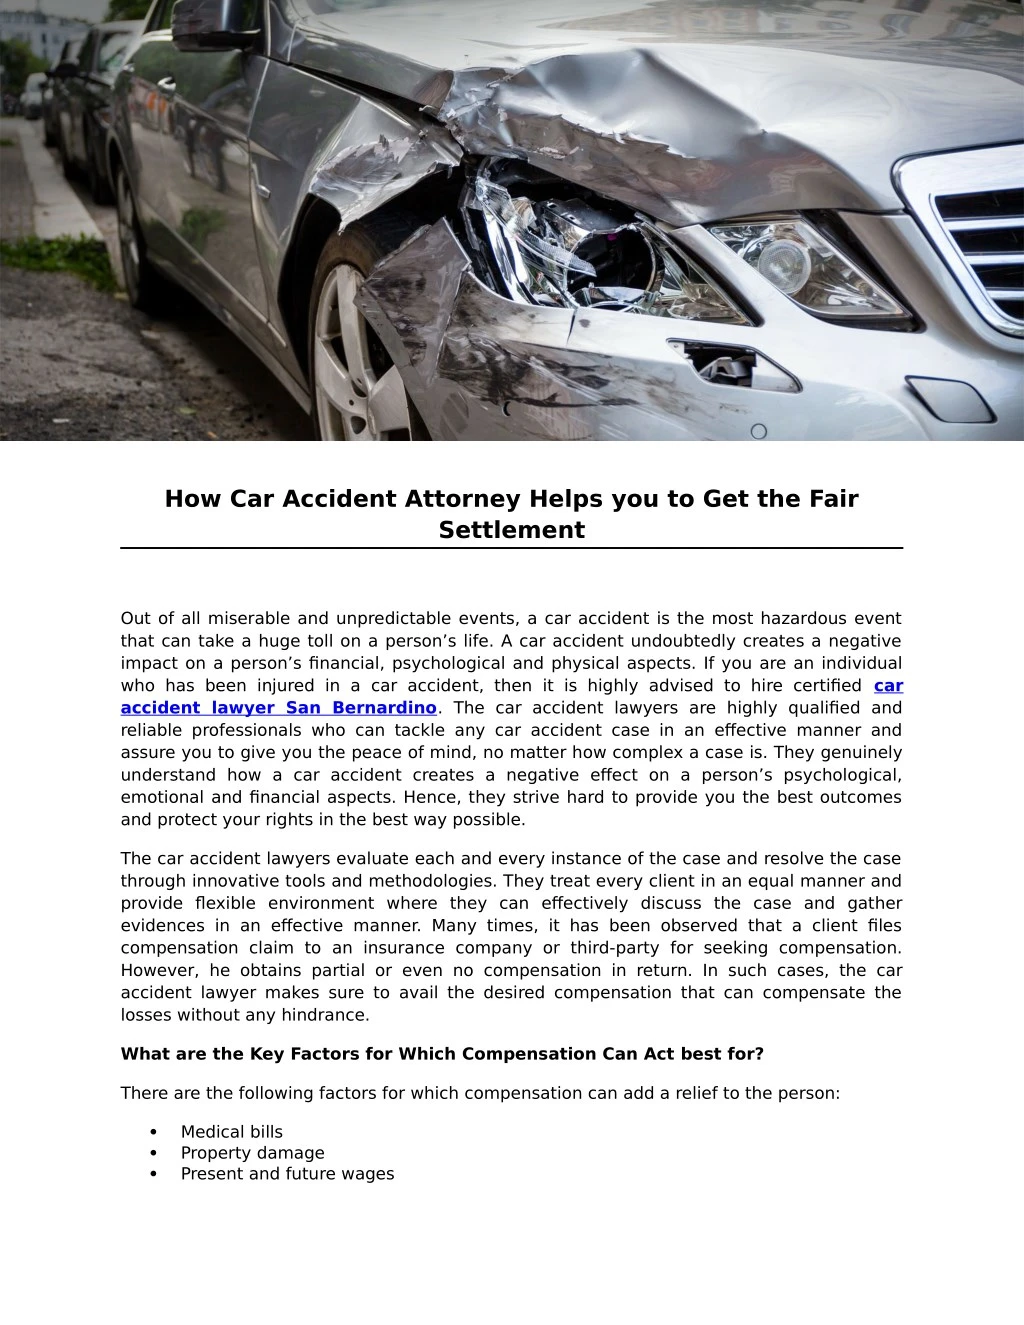 how car accident attorney helps